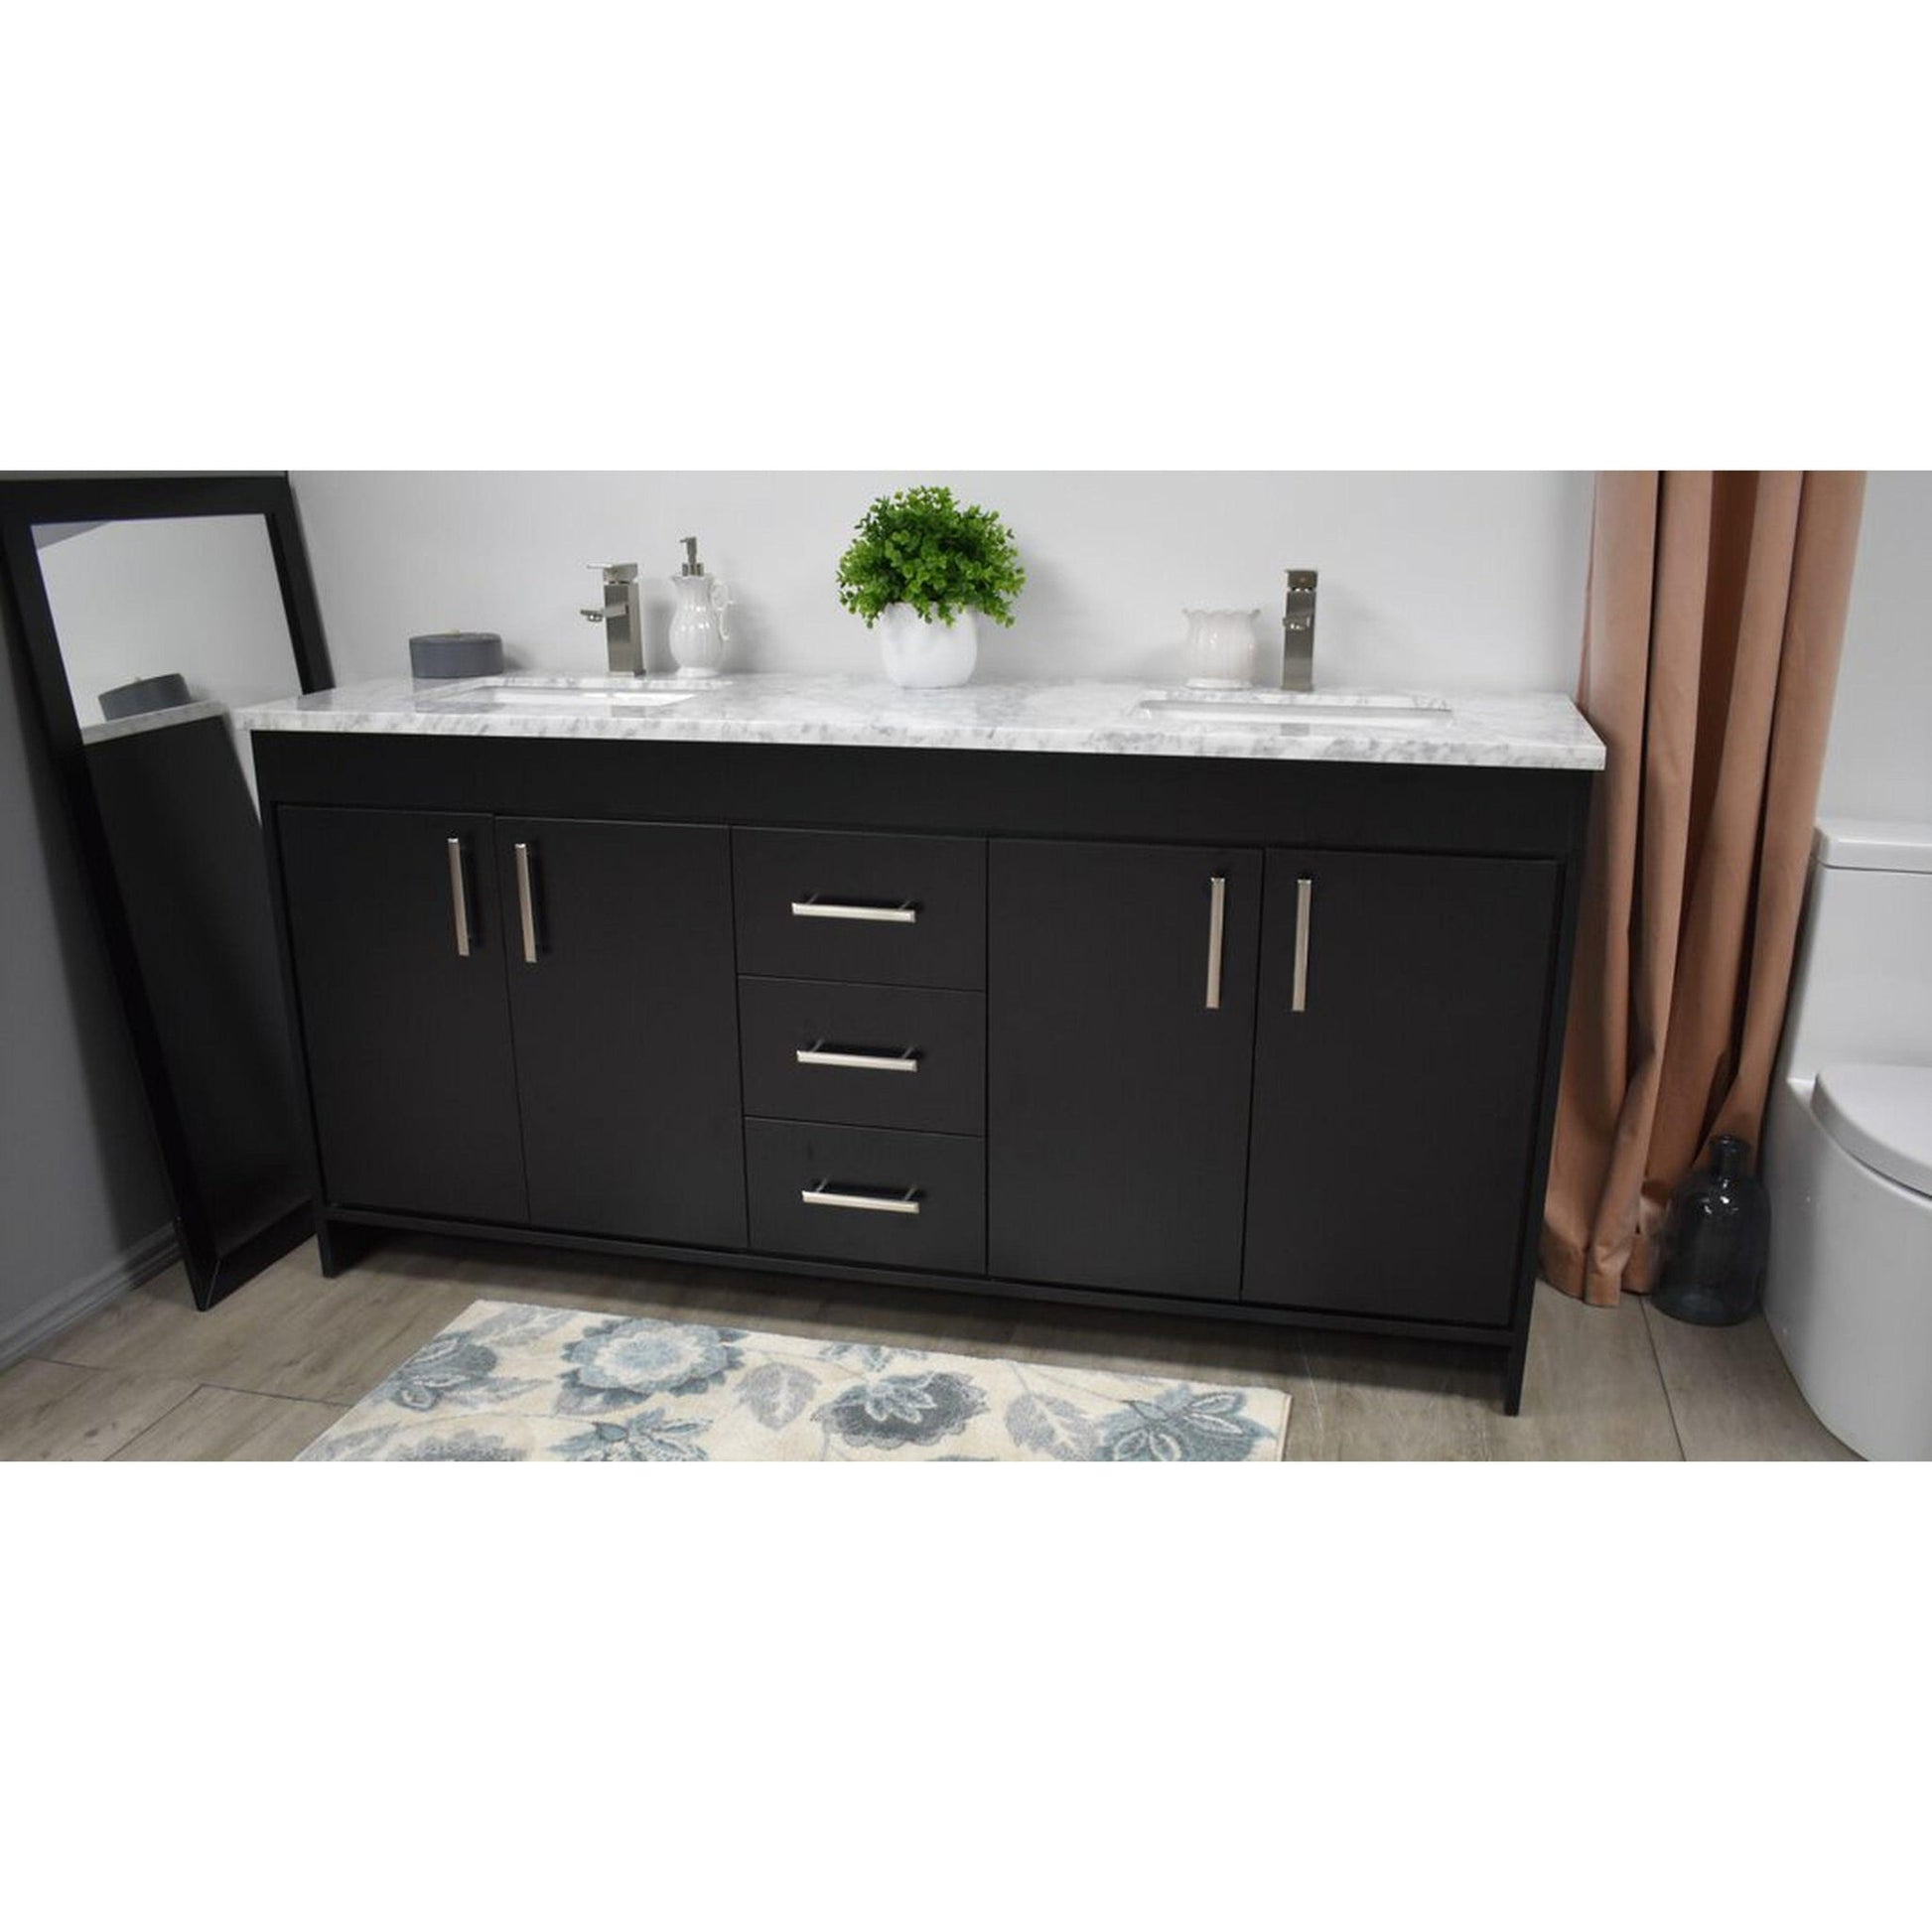 Volpa USA Capri 72" x 22" Black Freestanding Modern Bathroom Vanity With Undermount Double Sink And Carrara Marble Top With Brushed Nickel Edge Handles